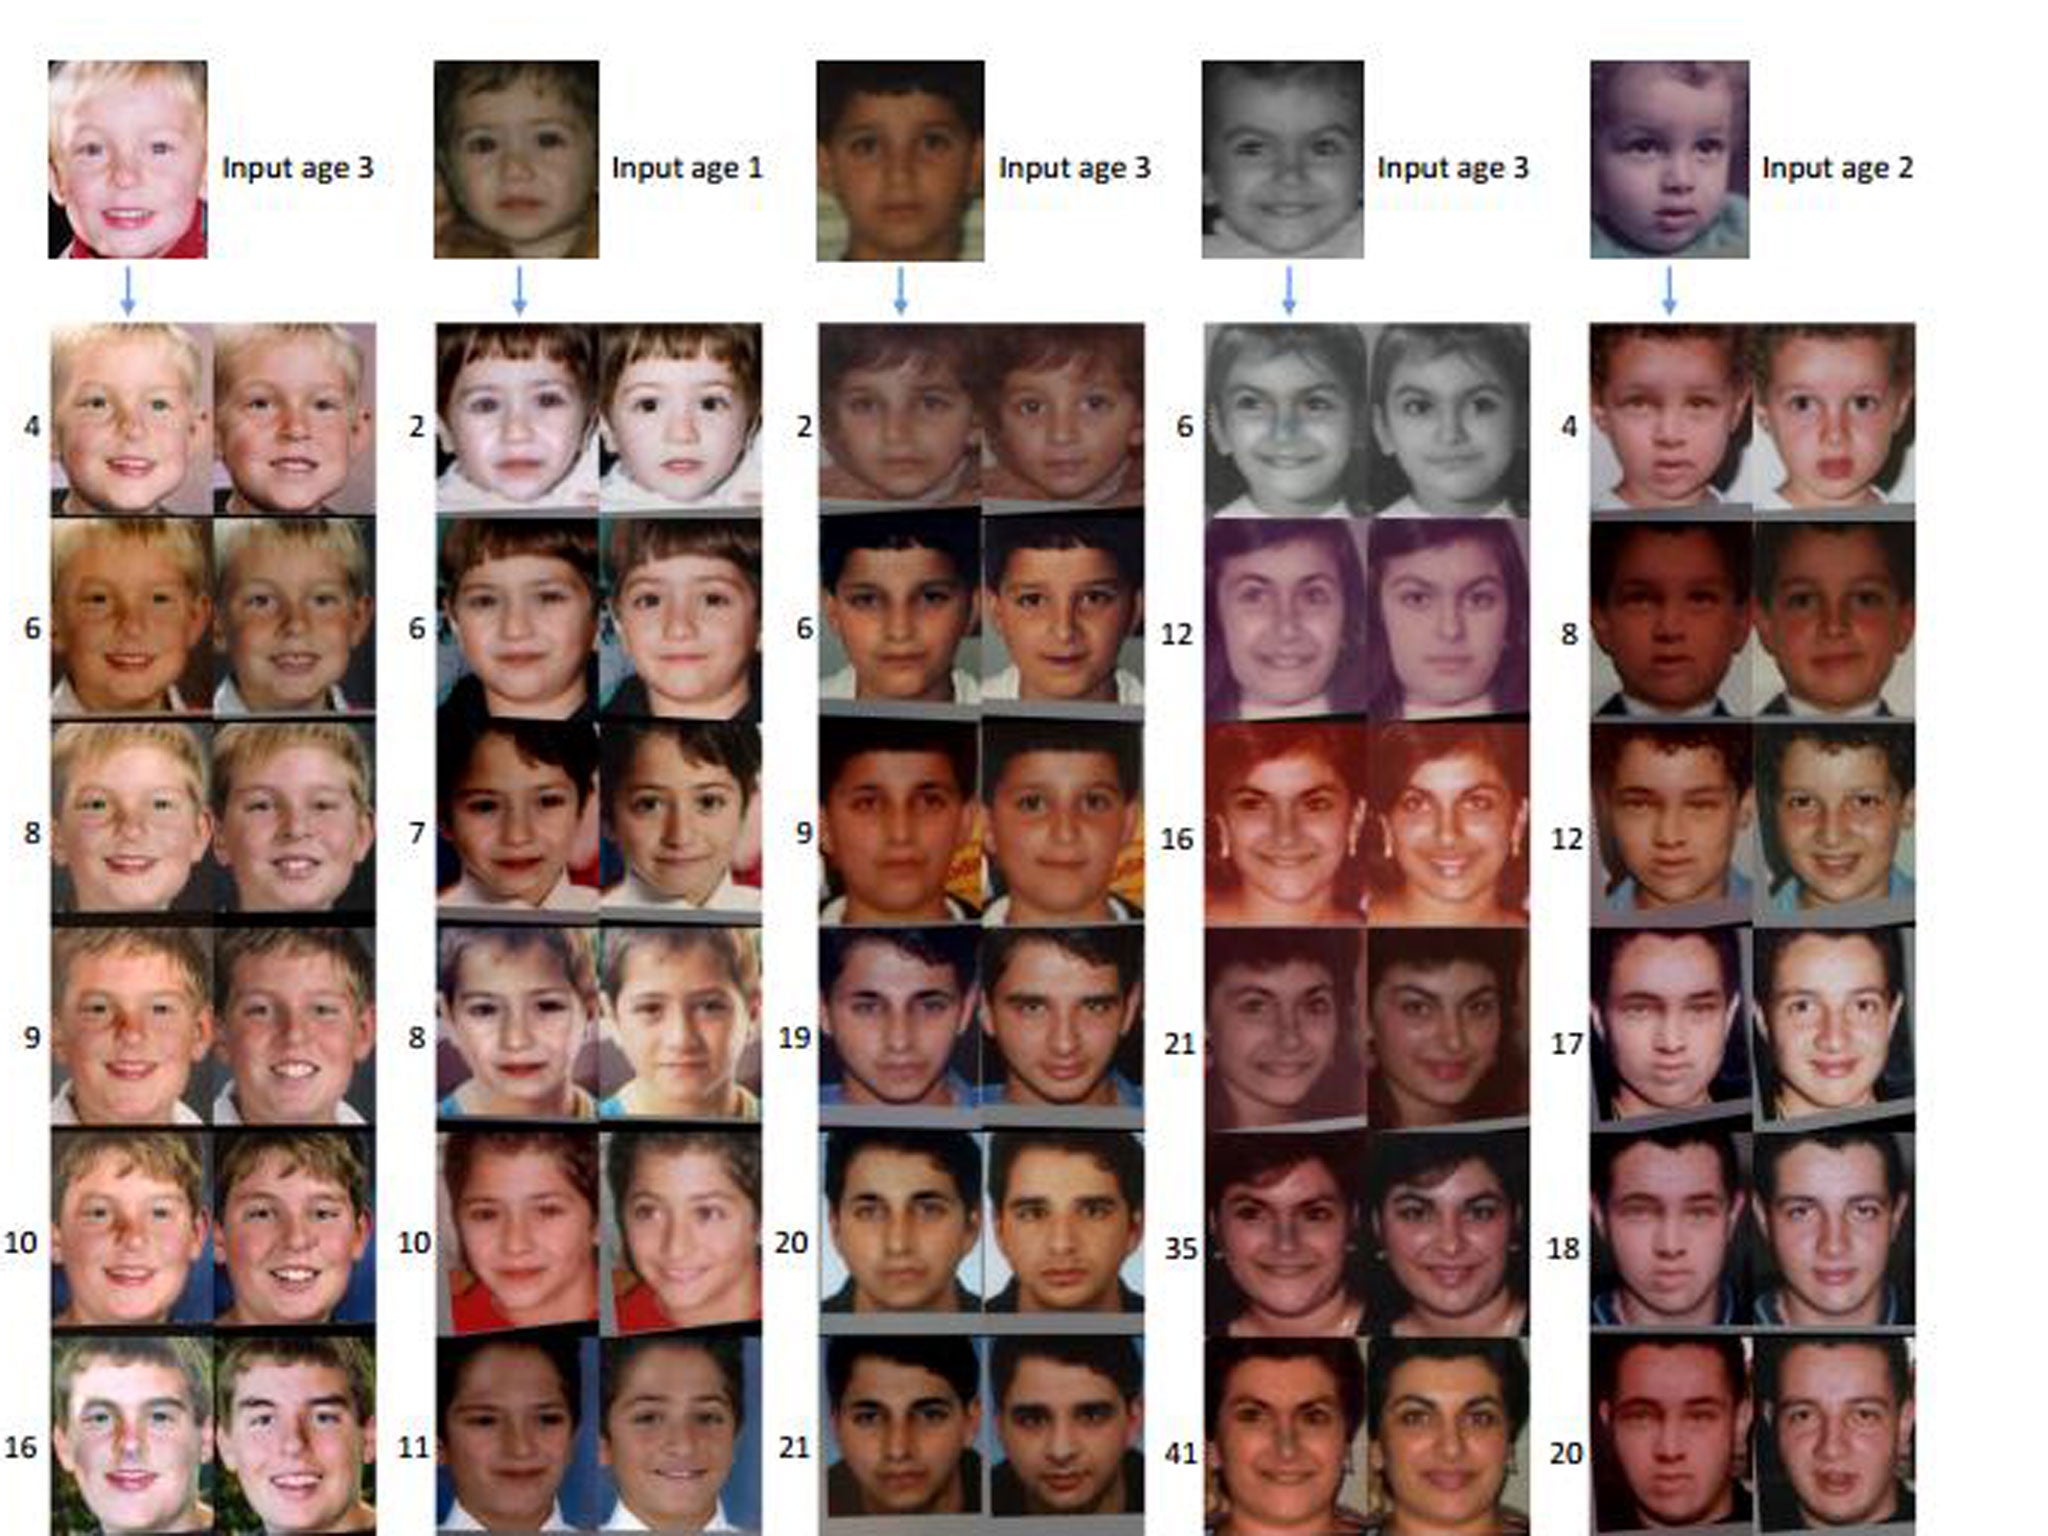 The software determines the average pixel arrangement from thousands of random pictures taken from the internet of children and adults of different ages and from both sexes